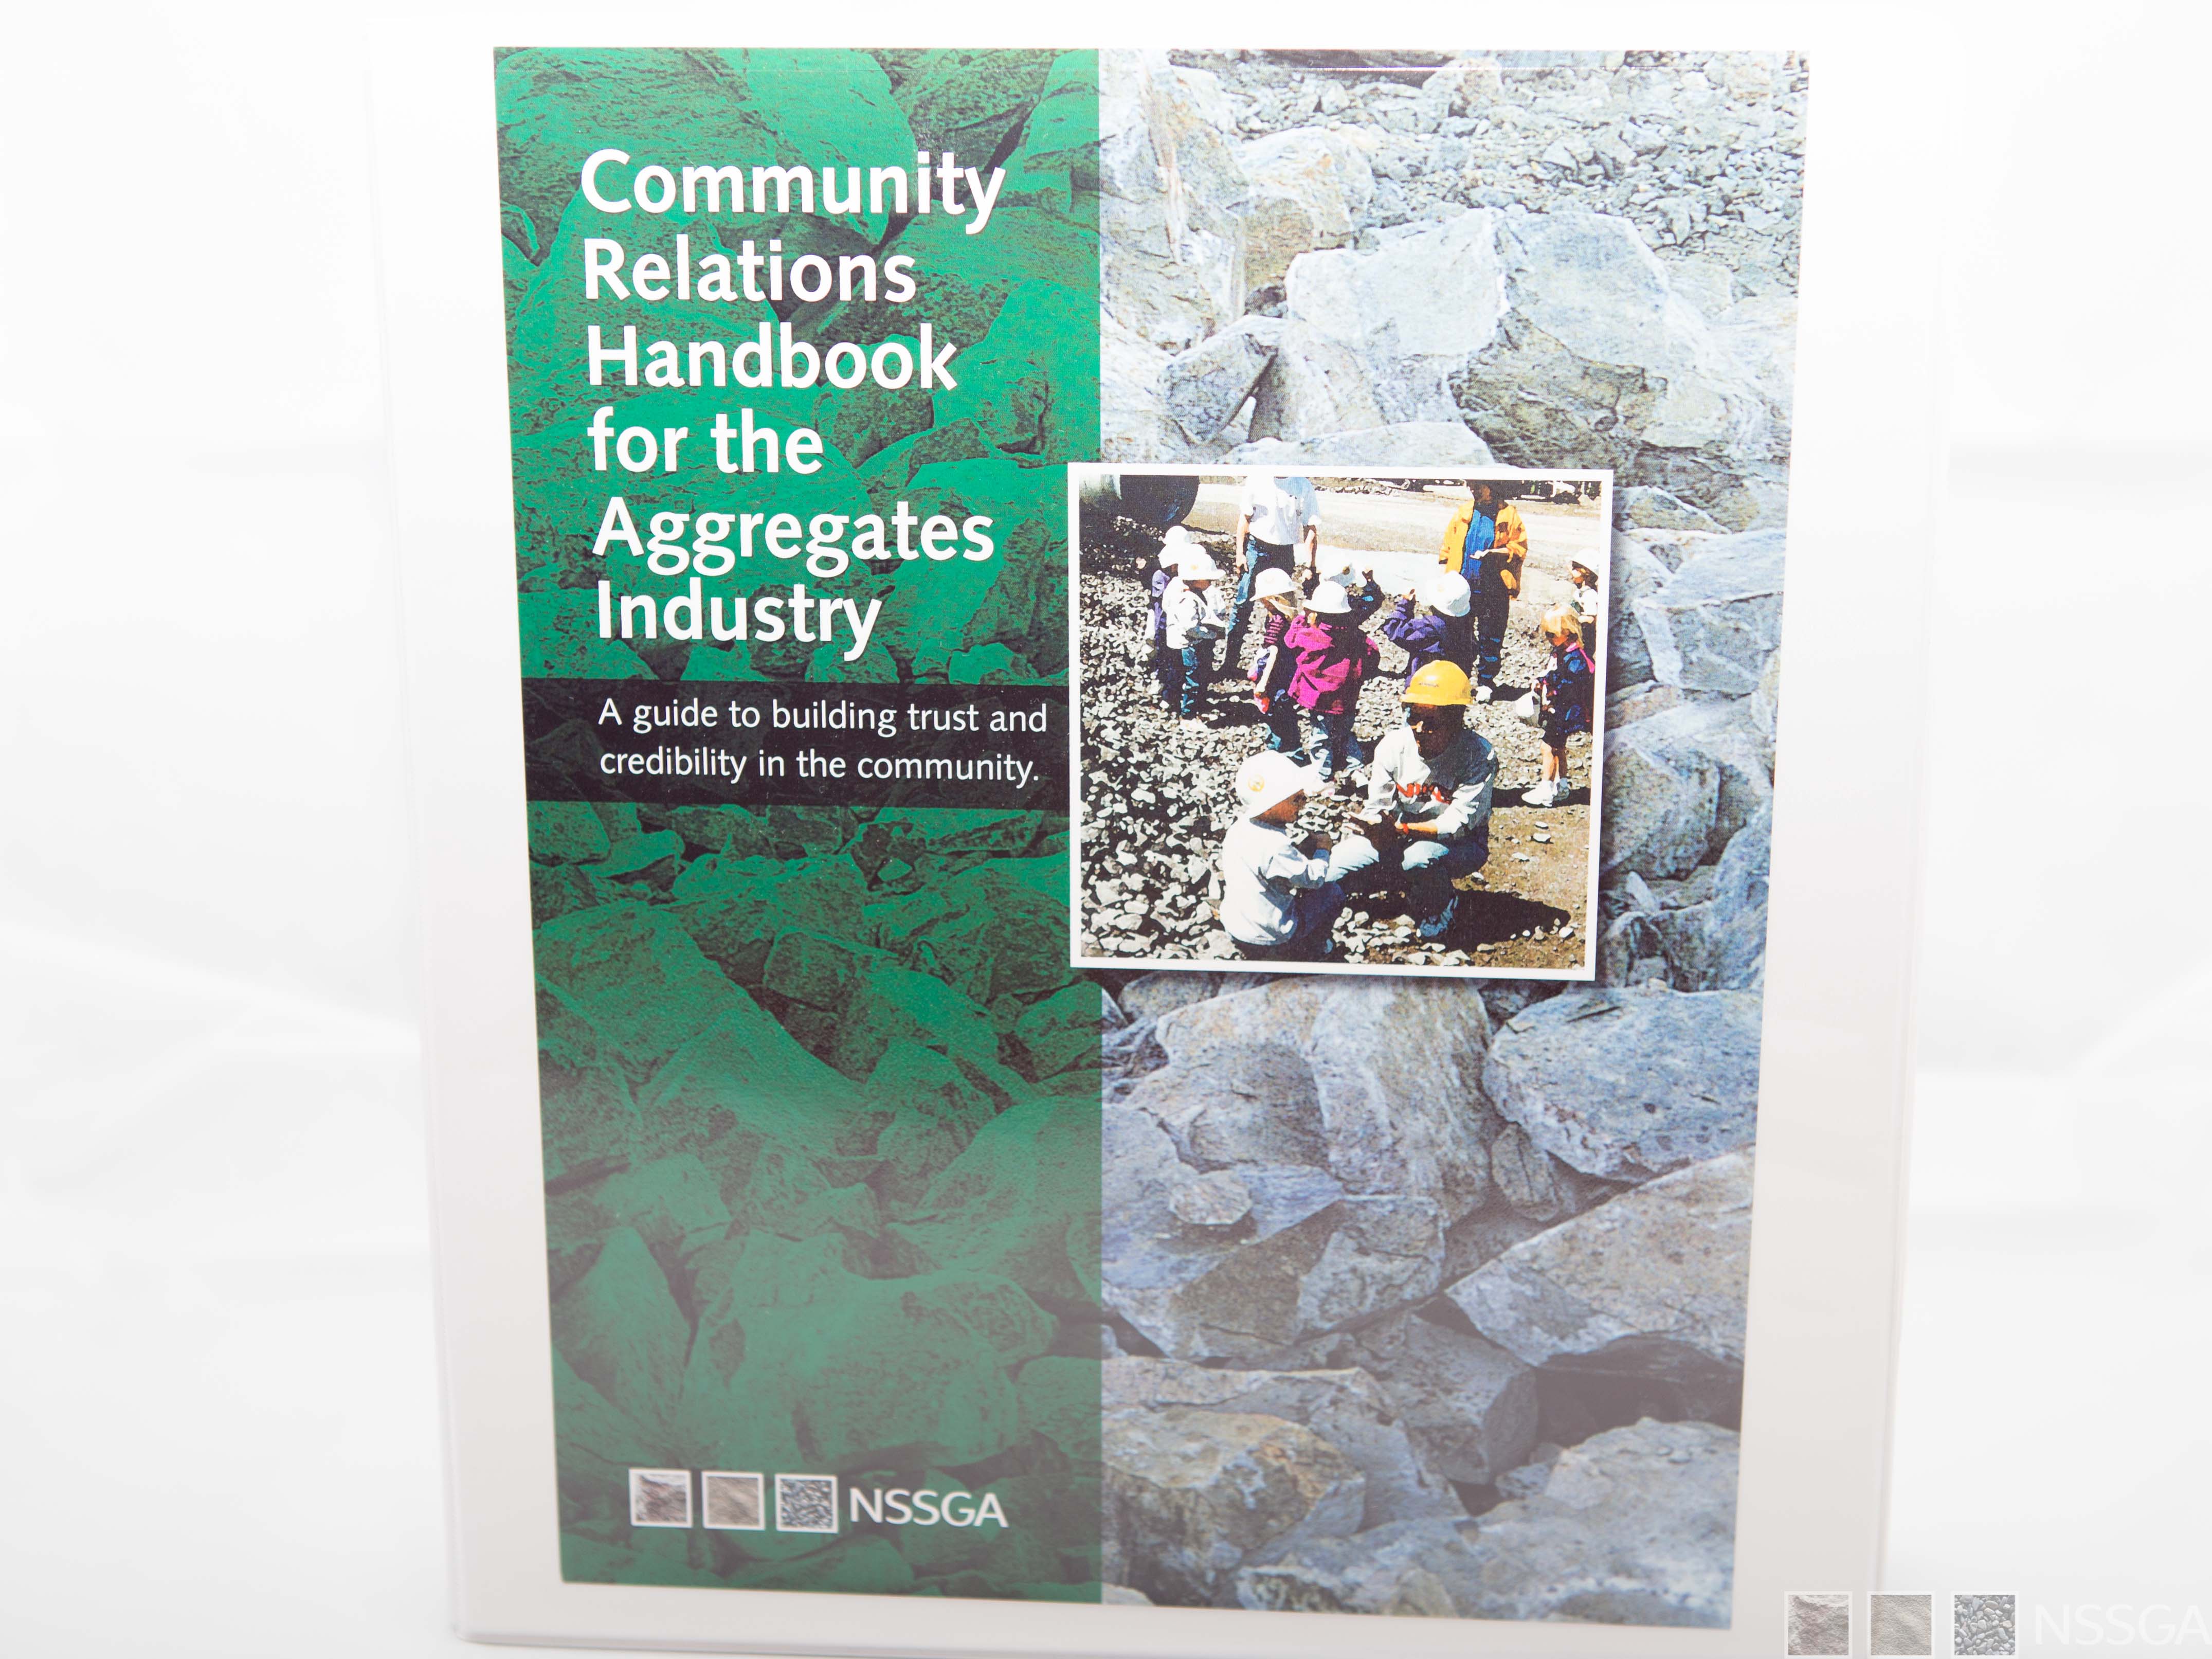 Community Relations Handbook for the Aggregates Industry